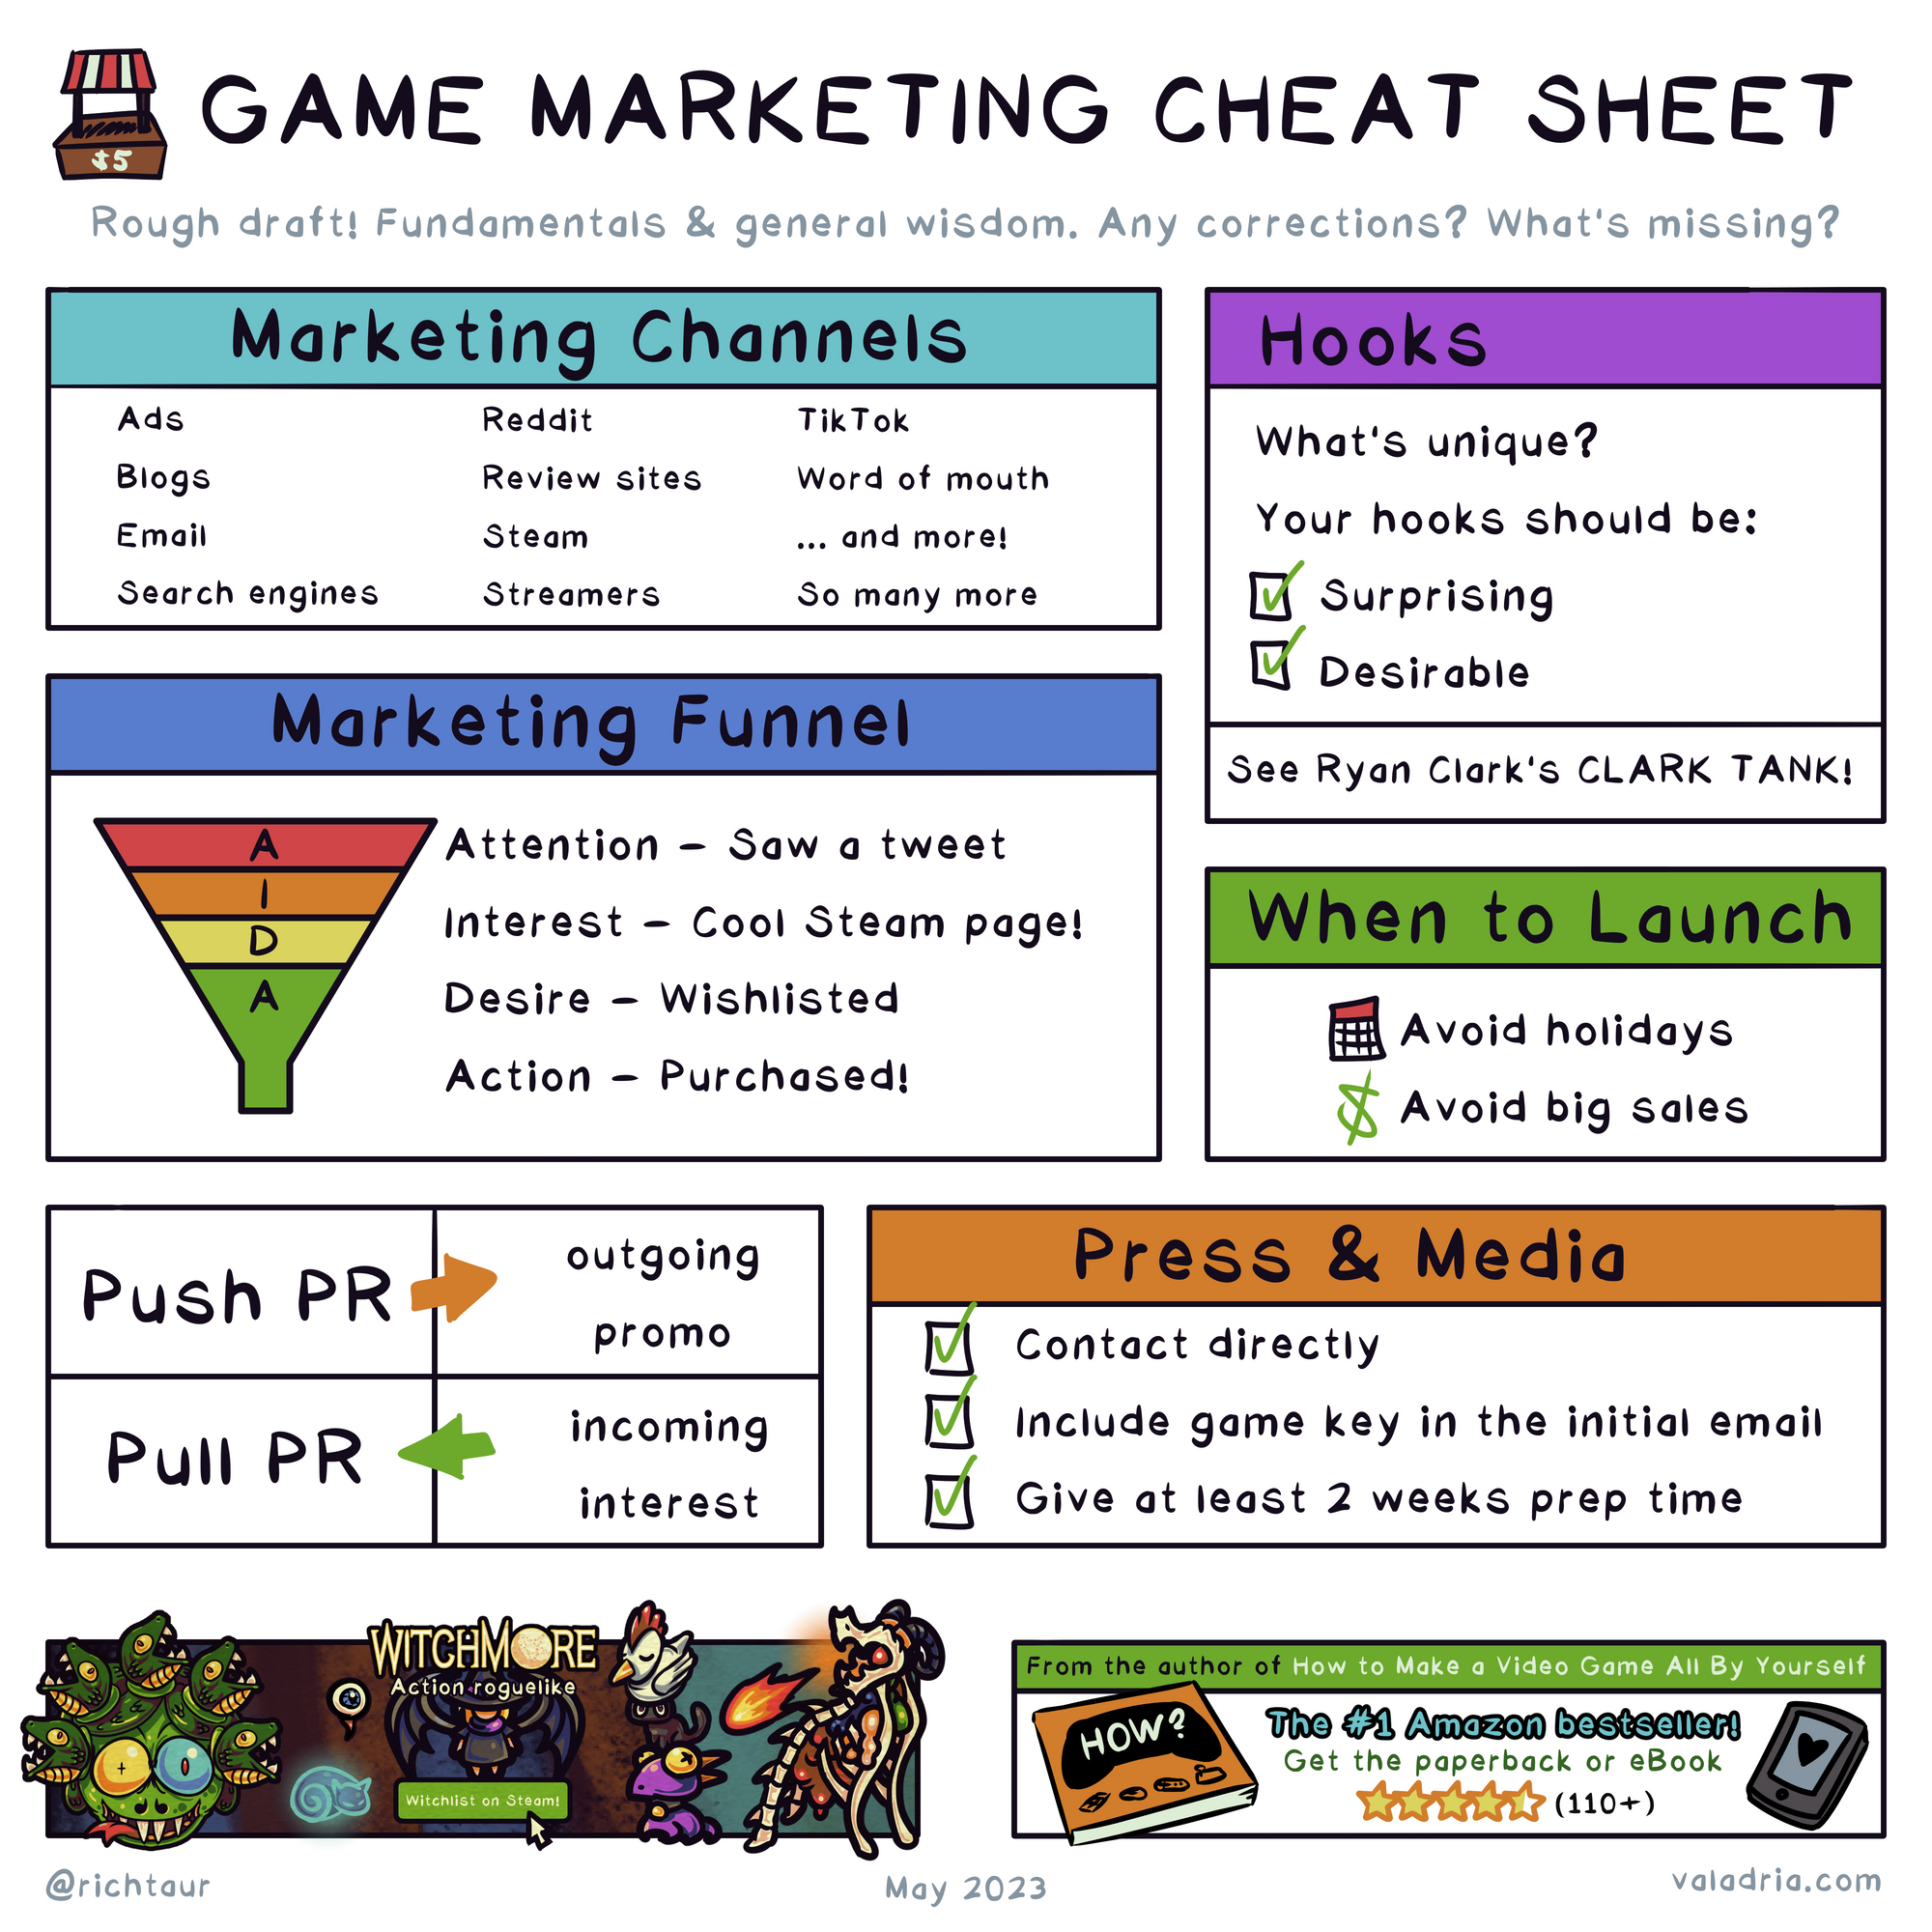 GAME MARKETING CHEAT SHEET Rough draft! Fundamentals & general wisdom. Any corrections? What's missing? Marketing Channels Ads Reddit TikTok Blogs Review sites word of mouth Email Steam ... and more! Search engines Streamers So many more  Hooks What's unique? Your hooks should be: Surprising Desirable See Ryan Clark's CLARK TANK!  Marketing Funnel Attention - Saw a tweet Interest - Cool Steam page! Desire - Wishlisted Action - Purchased!  When to Launch Avoid holidays Avoid big sales  Push PR -> outgoing promo Pull PR <- incoming interest  Press & Media Contact directly Include game key in the initial email Give at least 2 weeks prep time  From the author of How to Make a Video Game All By Yourself @richtaur valadria.com